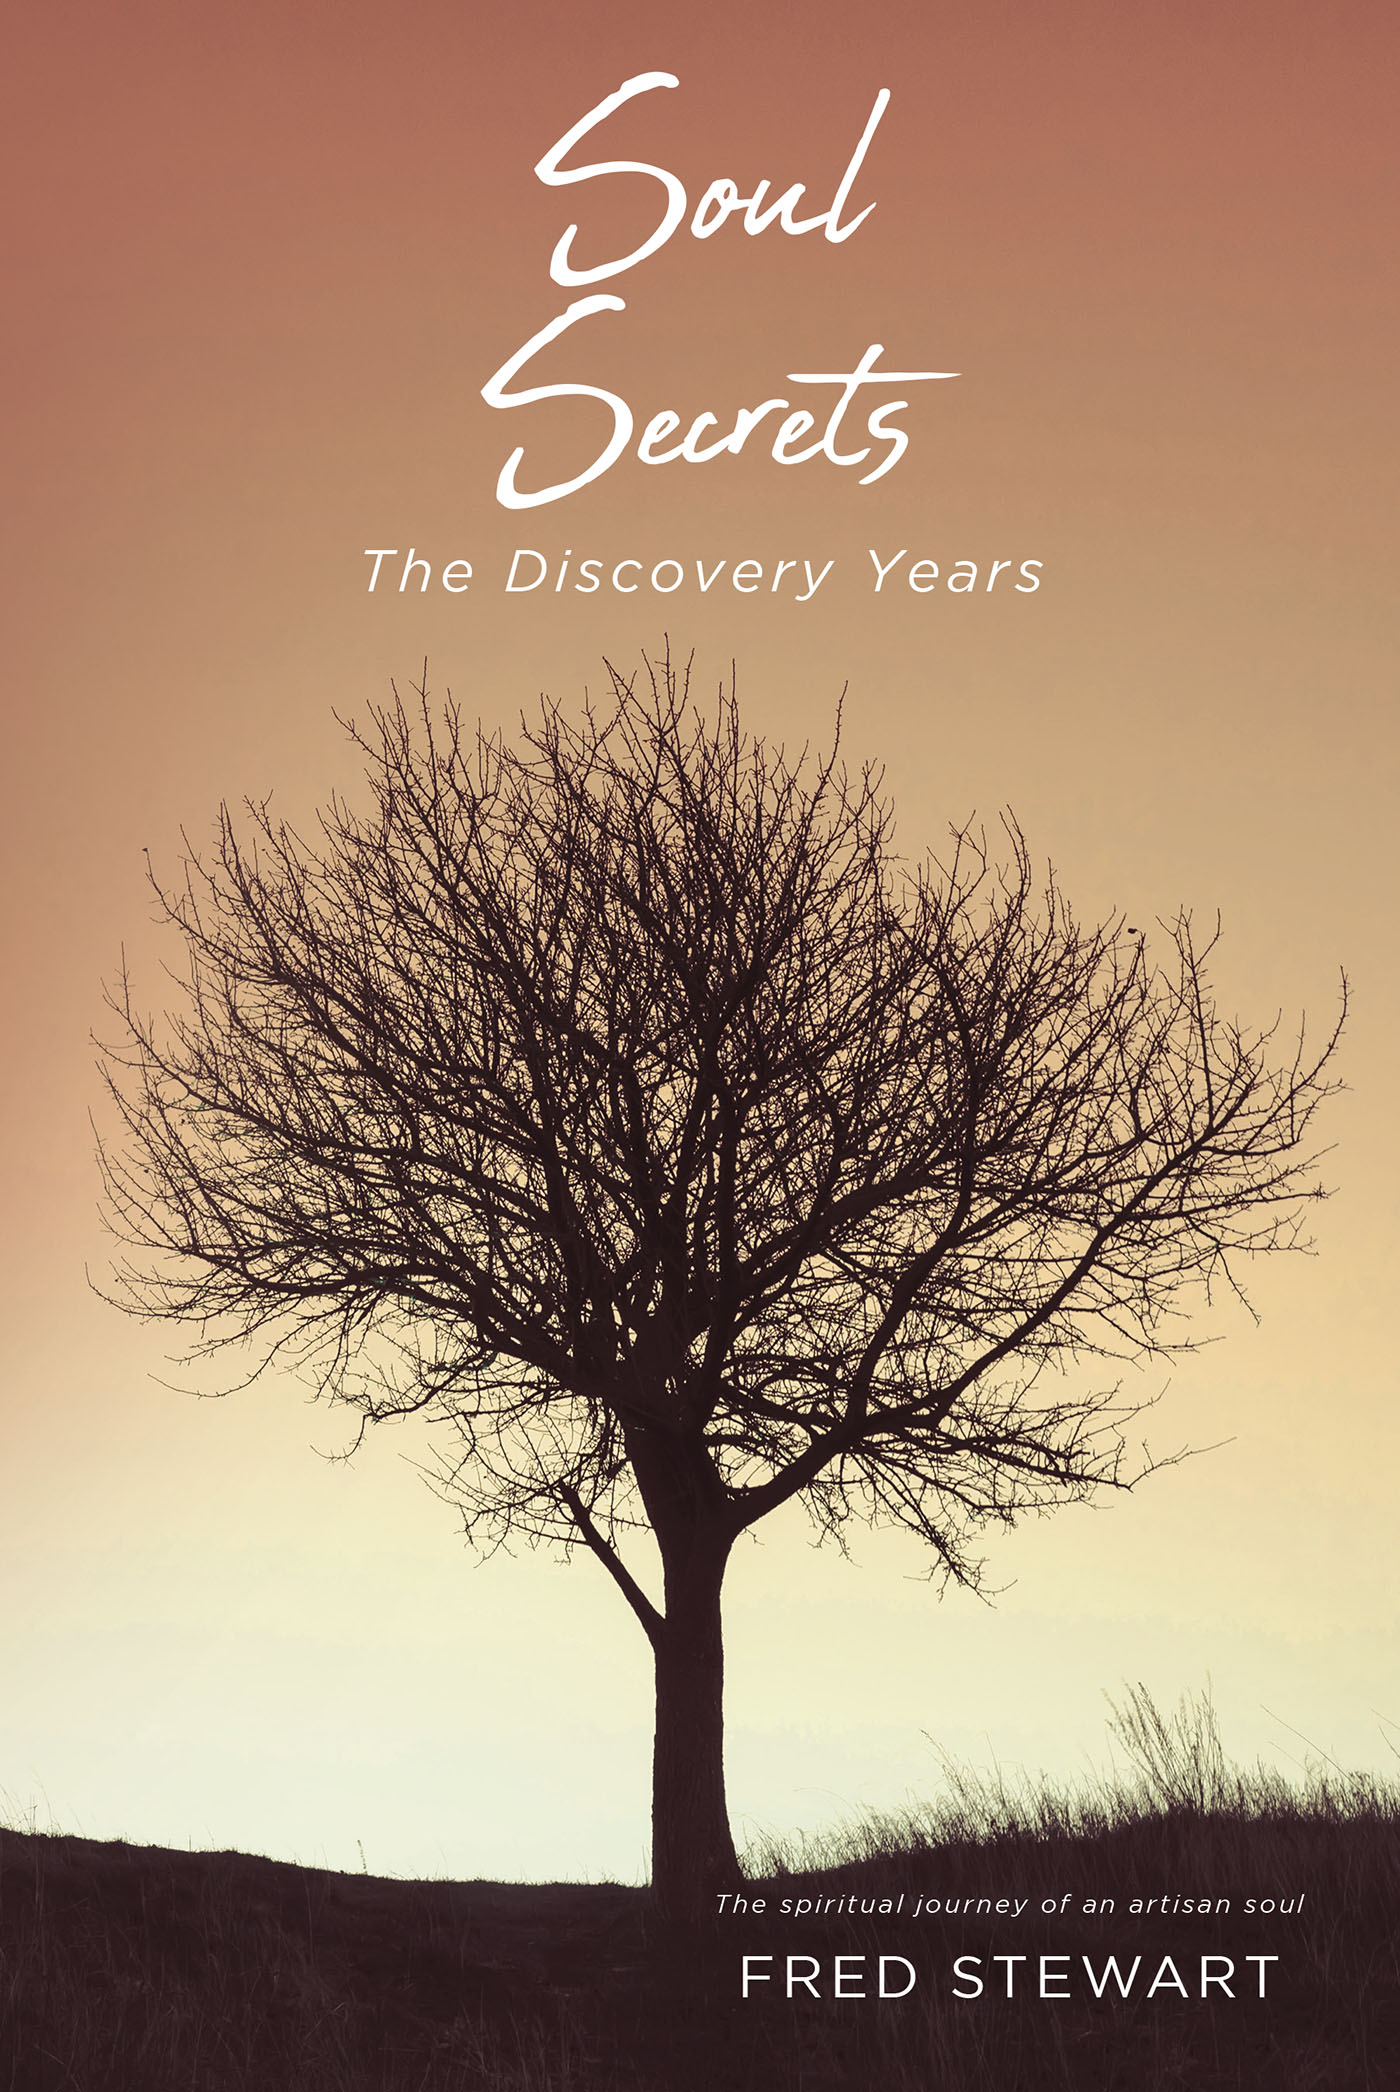 Fred Stewart’s New Book, "Soul Secrets," is an Enthralling Collection of Stories from the Author's Life That Explores Topics of Clairvoyance and Soul Healing